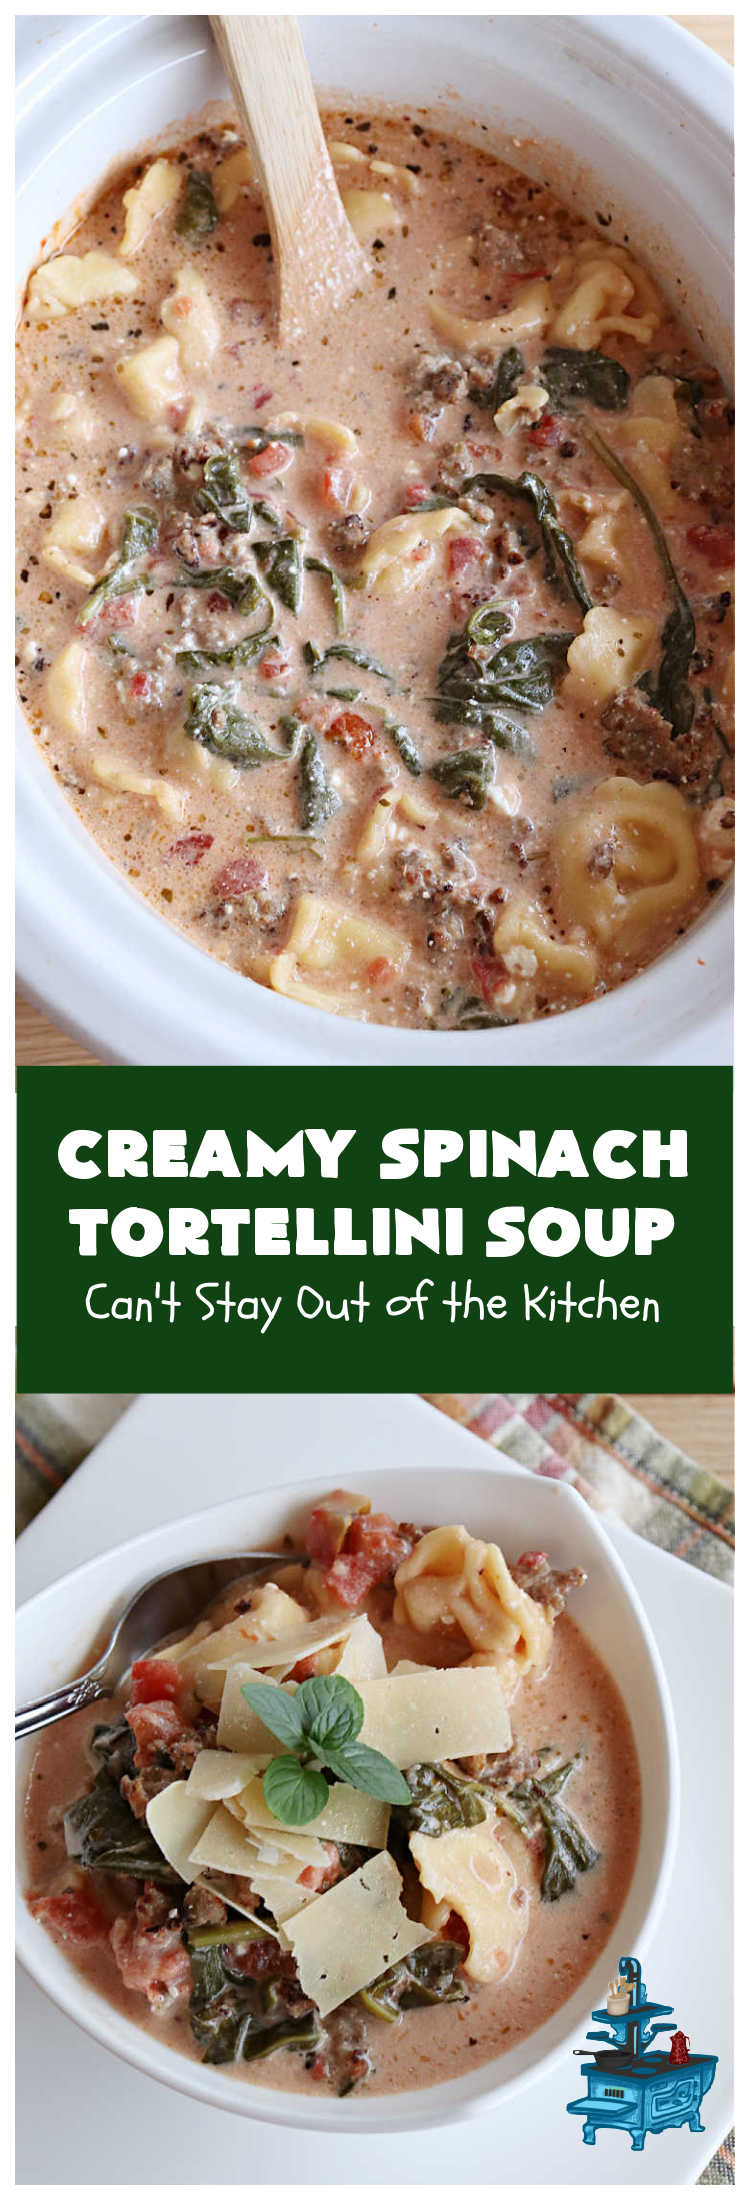 Creamy Spinach Tortellini Soup | Can't Stay Out of the Kitchen | this fantastic #soup uses only about a handful of ingredients but it cooks up into one of the most delicious #ComfortFood #recipes ever! This mouthwatering soup is so easy since it's made in the #SlowCooker! Great for cool nights or lunches. #spinach #tortellini #tomatoes #CreamCheese #ItalianSausage #pork #CreamySpinachTortelliniSoup